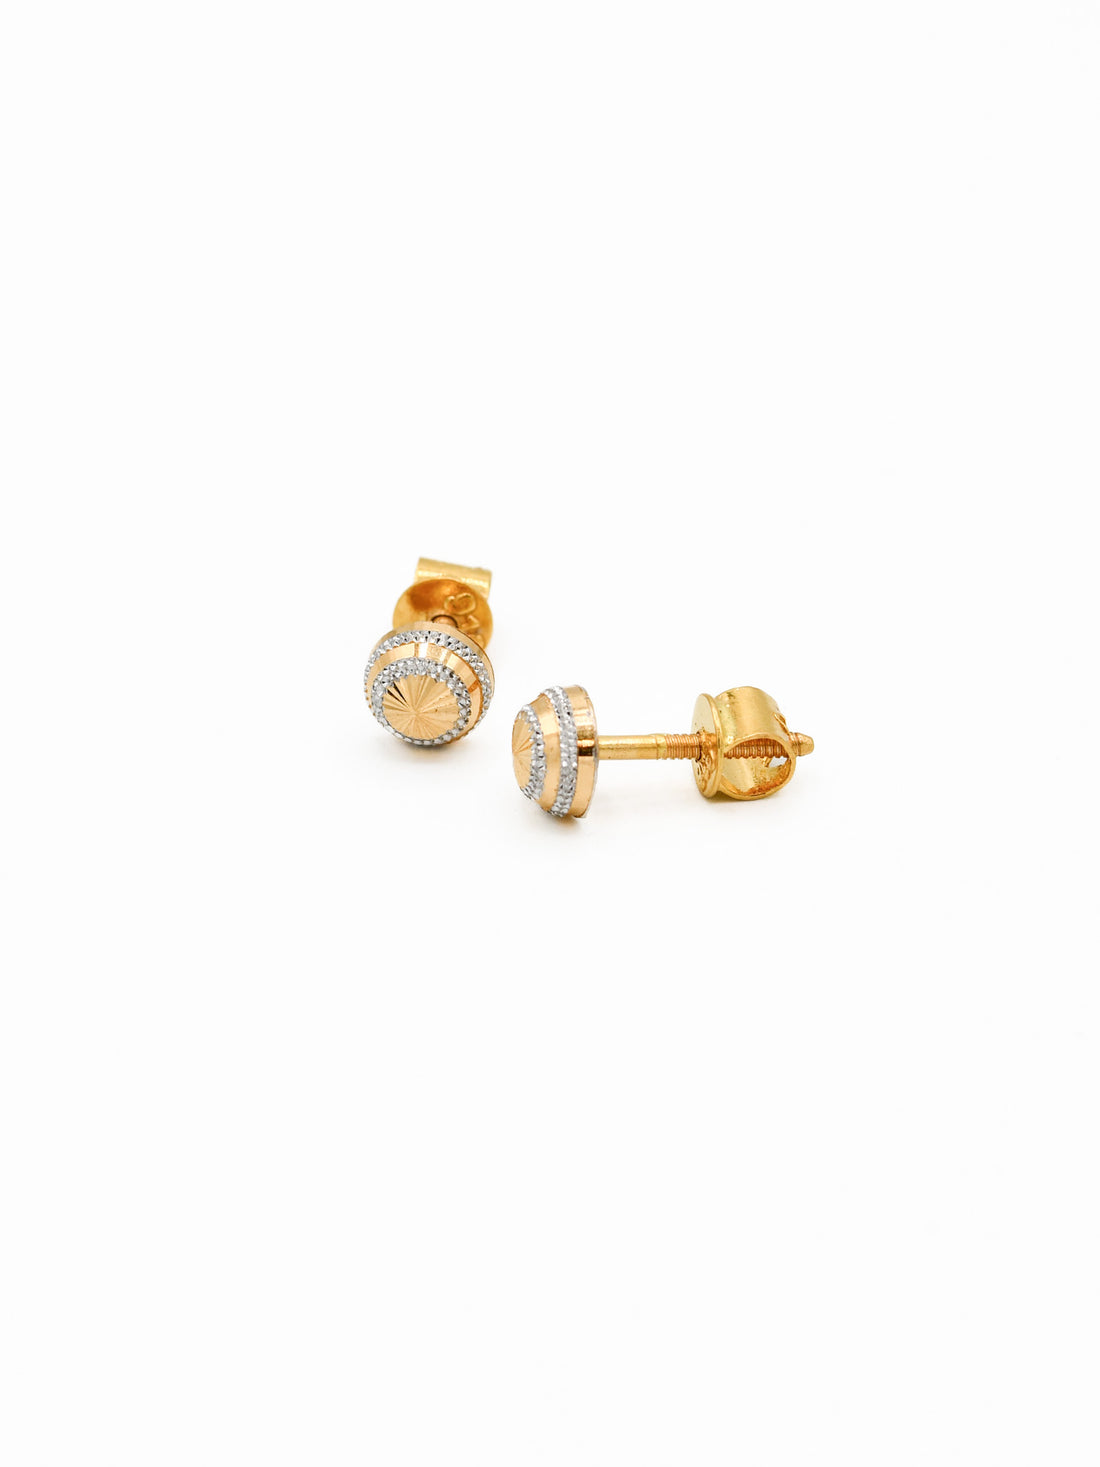 22ct Gold Two Tone Stud Earrings